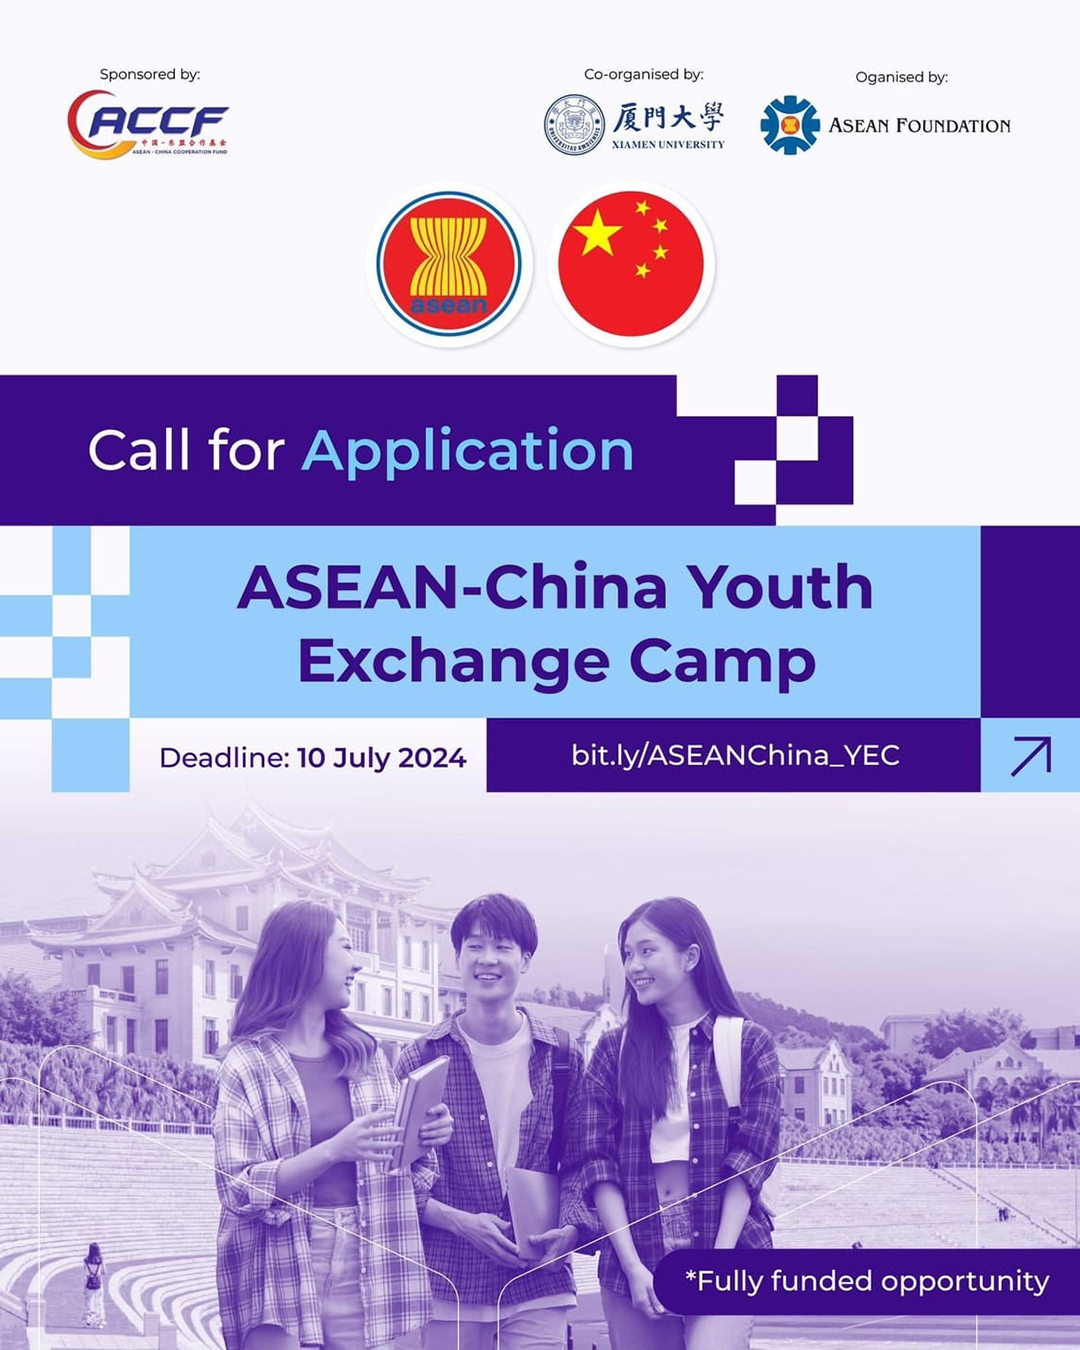 The ASEAN-China Youth Exchange Camp